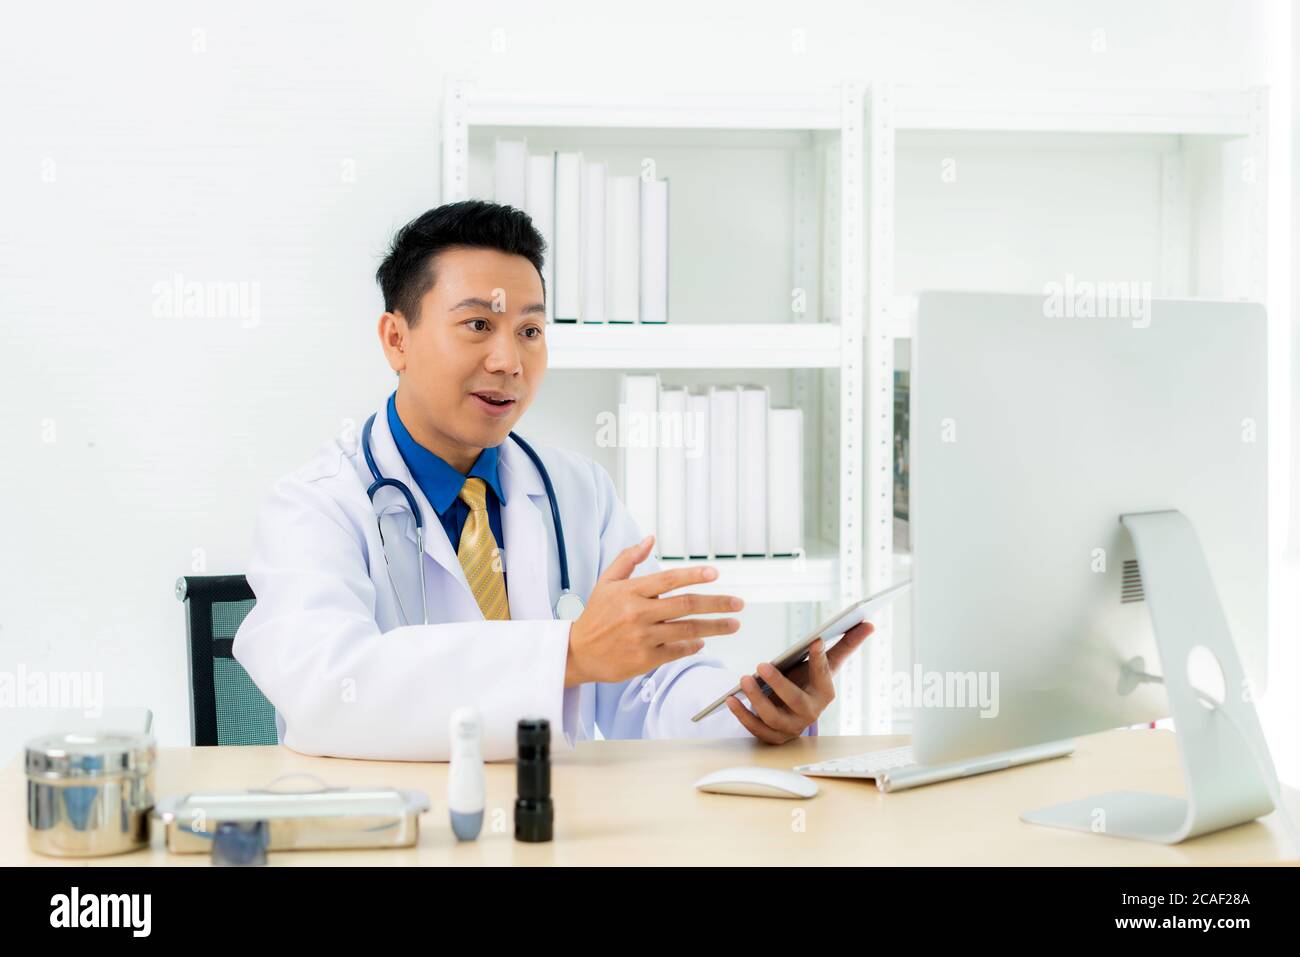 Asian man doctor wears white coat and headset speaking videoconferencing on laptop computer using online video call consultation app. Remote medical h Stock Photo